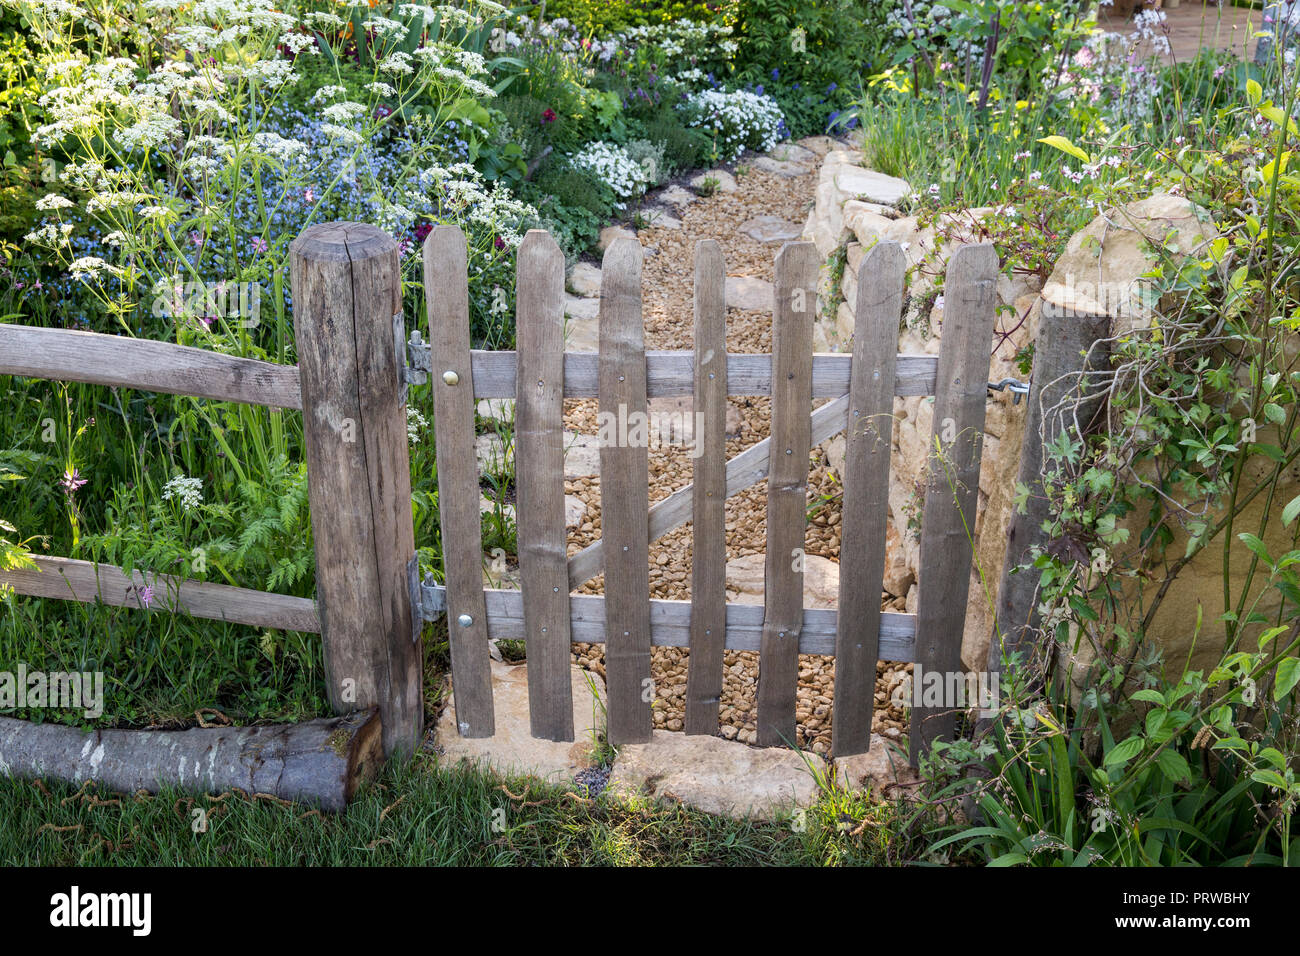 Rustic old wooden picket garden gate and fence wildflower English cottage garden style planting cow parsley gravel path Malvern Spring UK Stock Photo